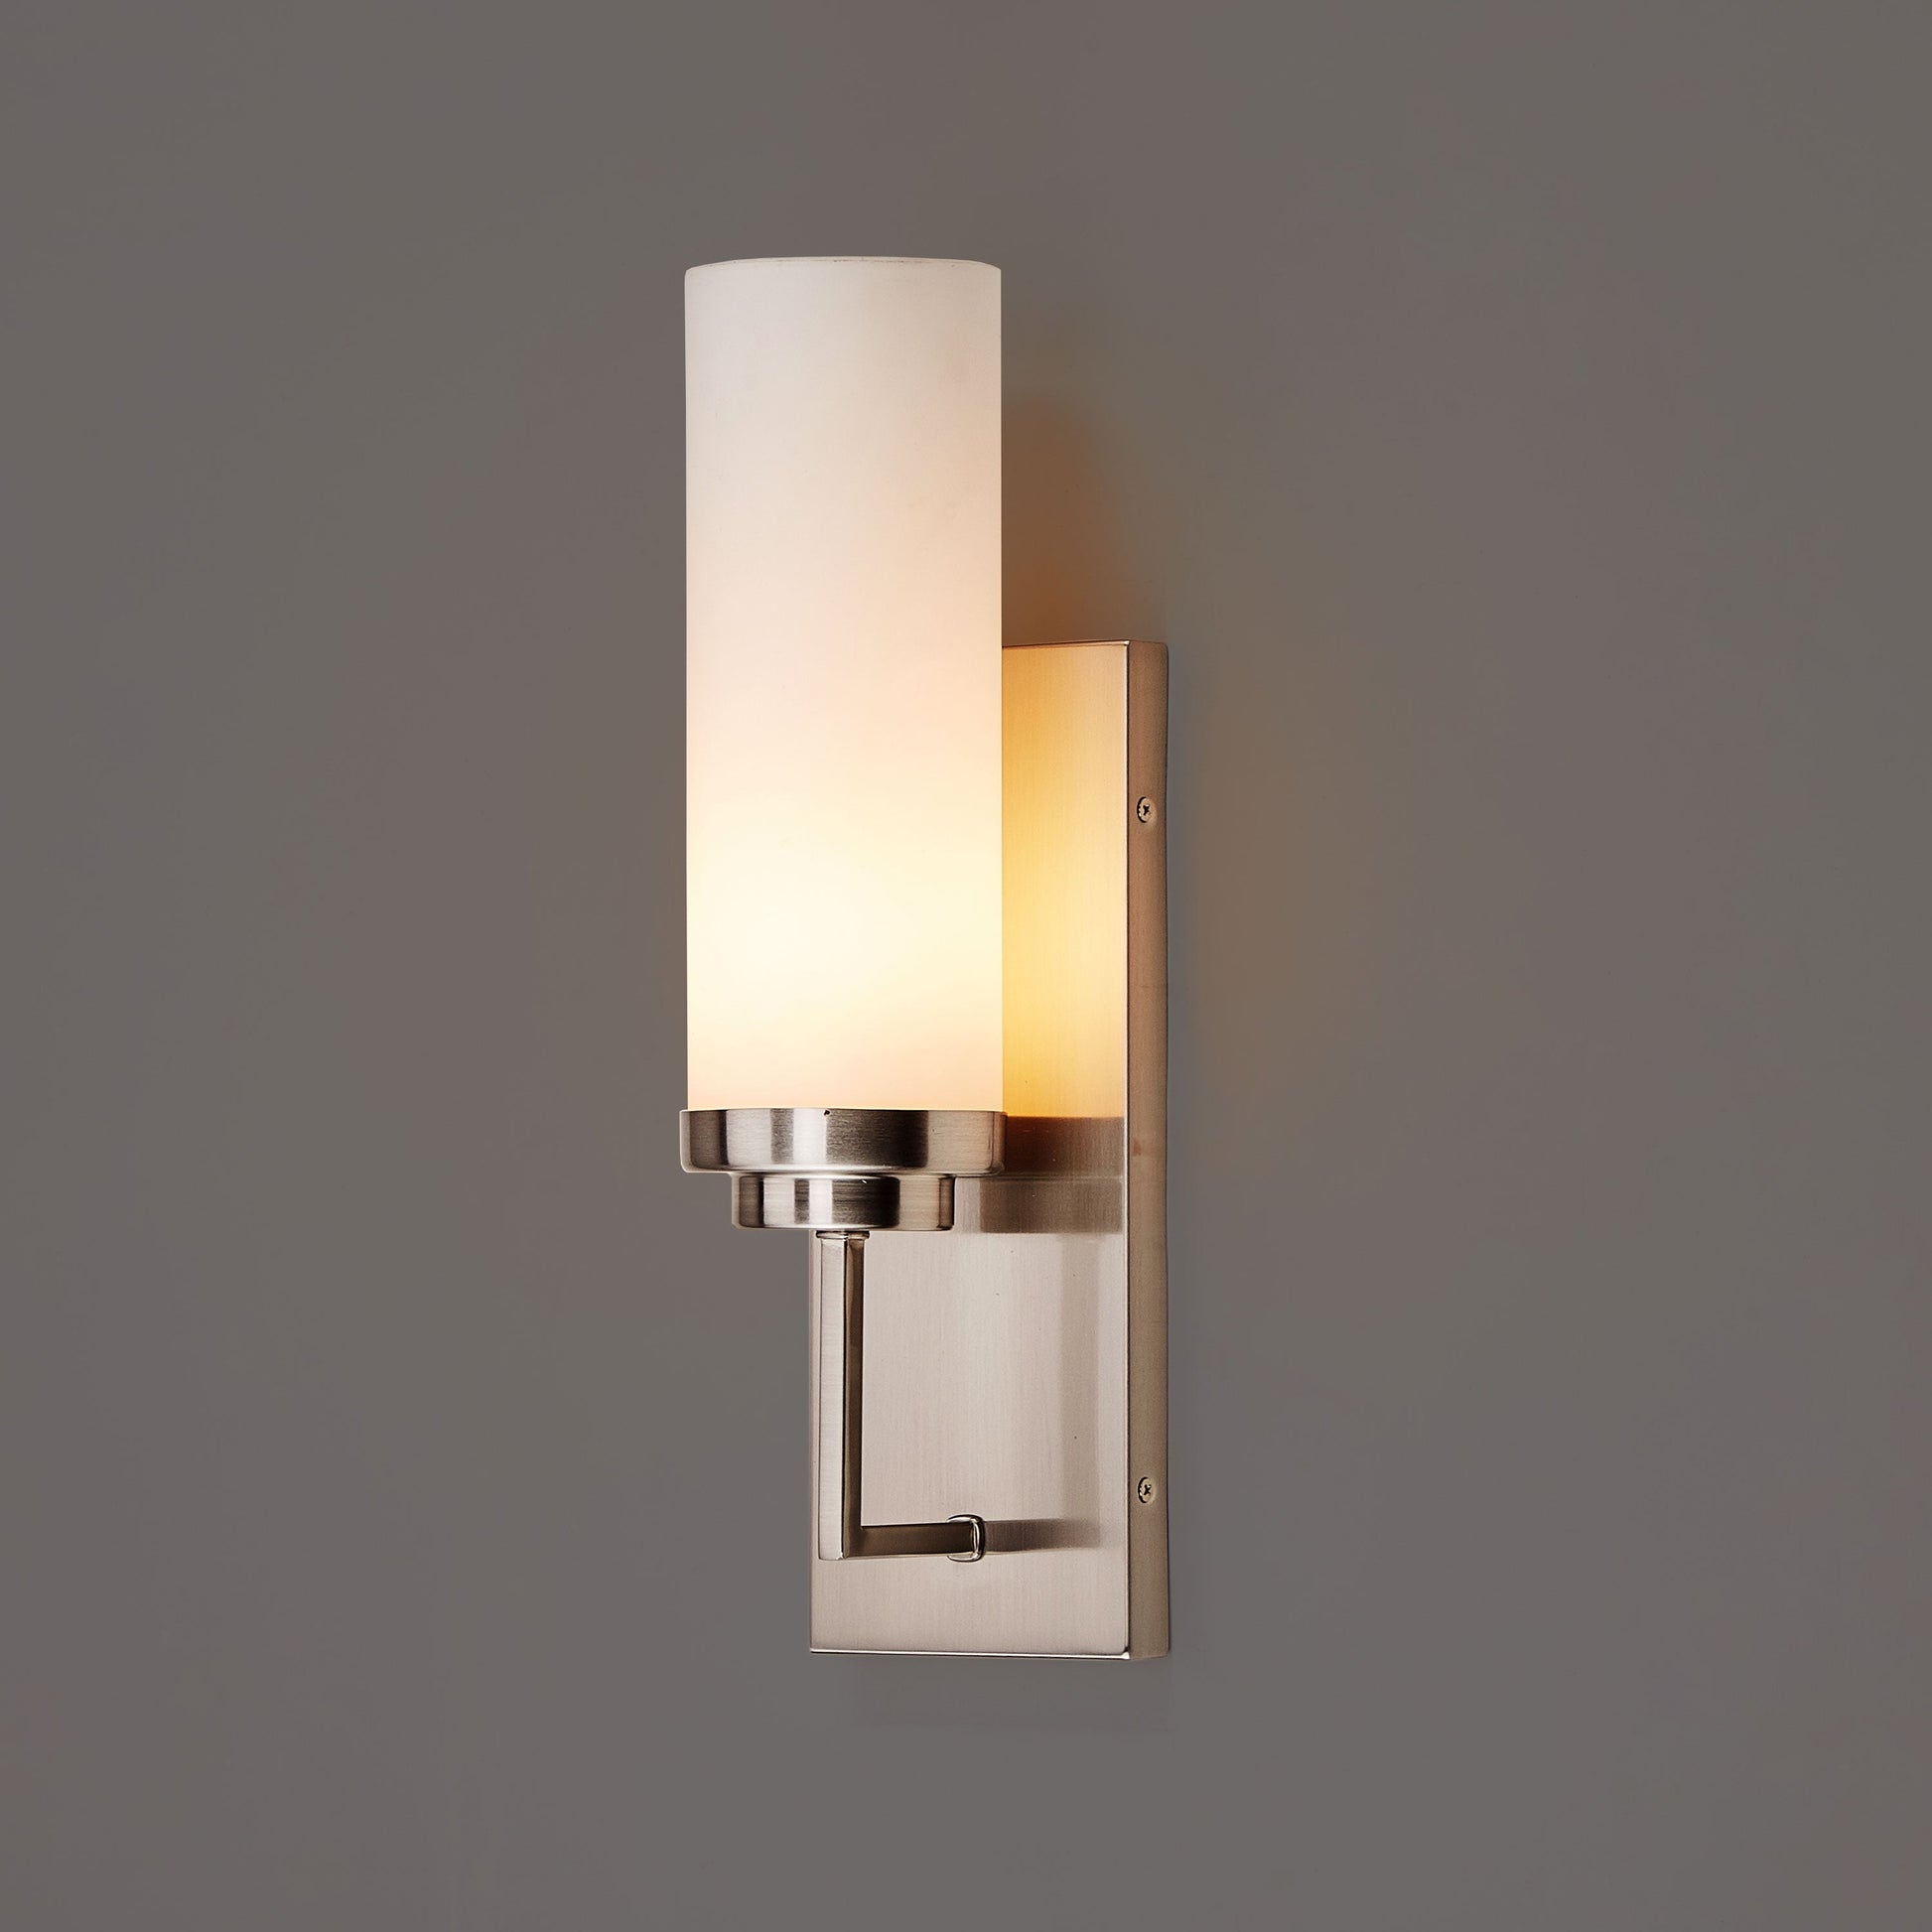 wall-mount-sconce-lighting-brushed-nickel-opal-glass